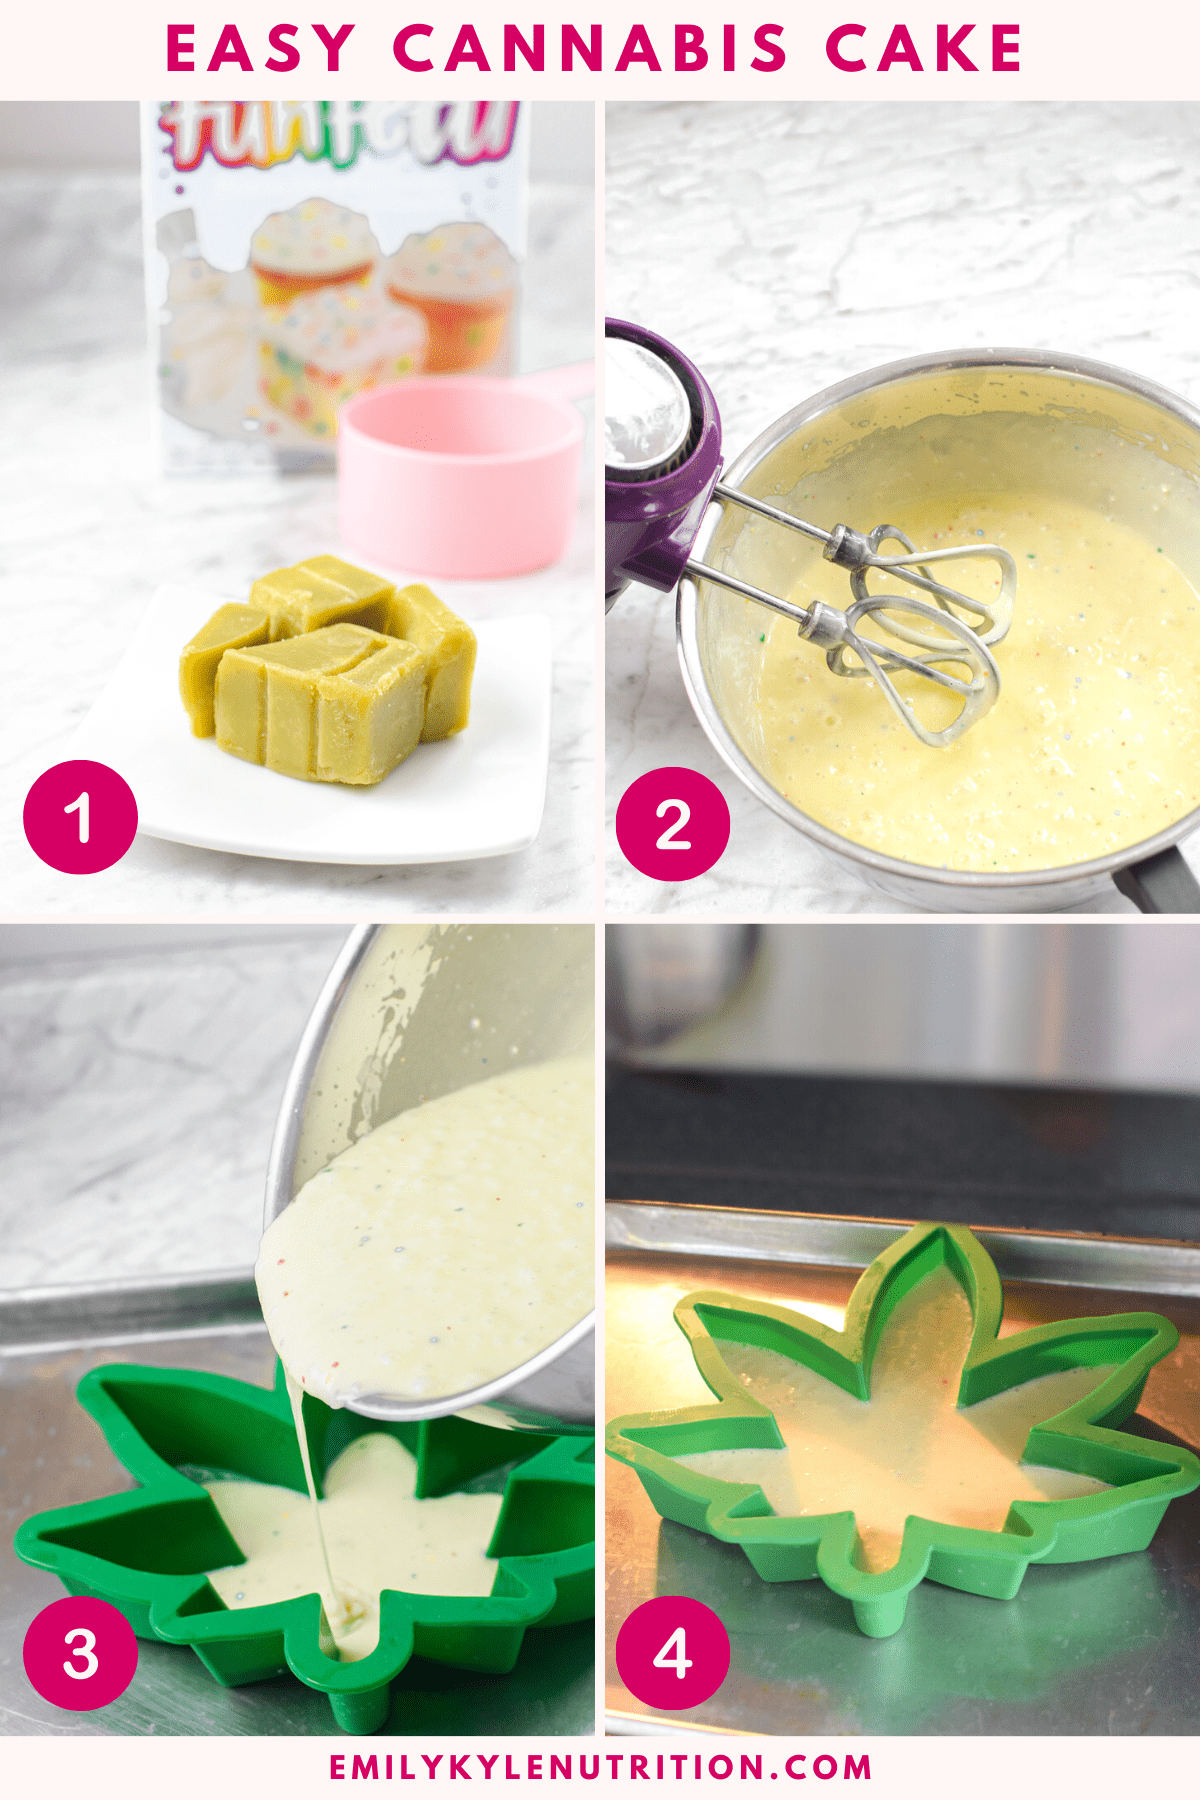 The first four steps needed to make a cannabis cake.